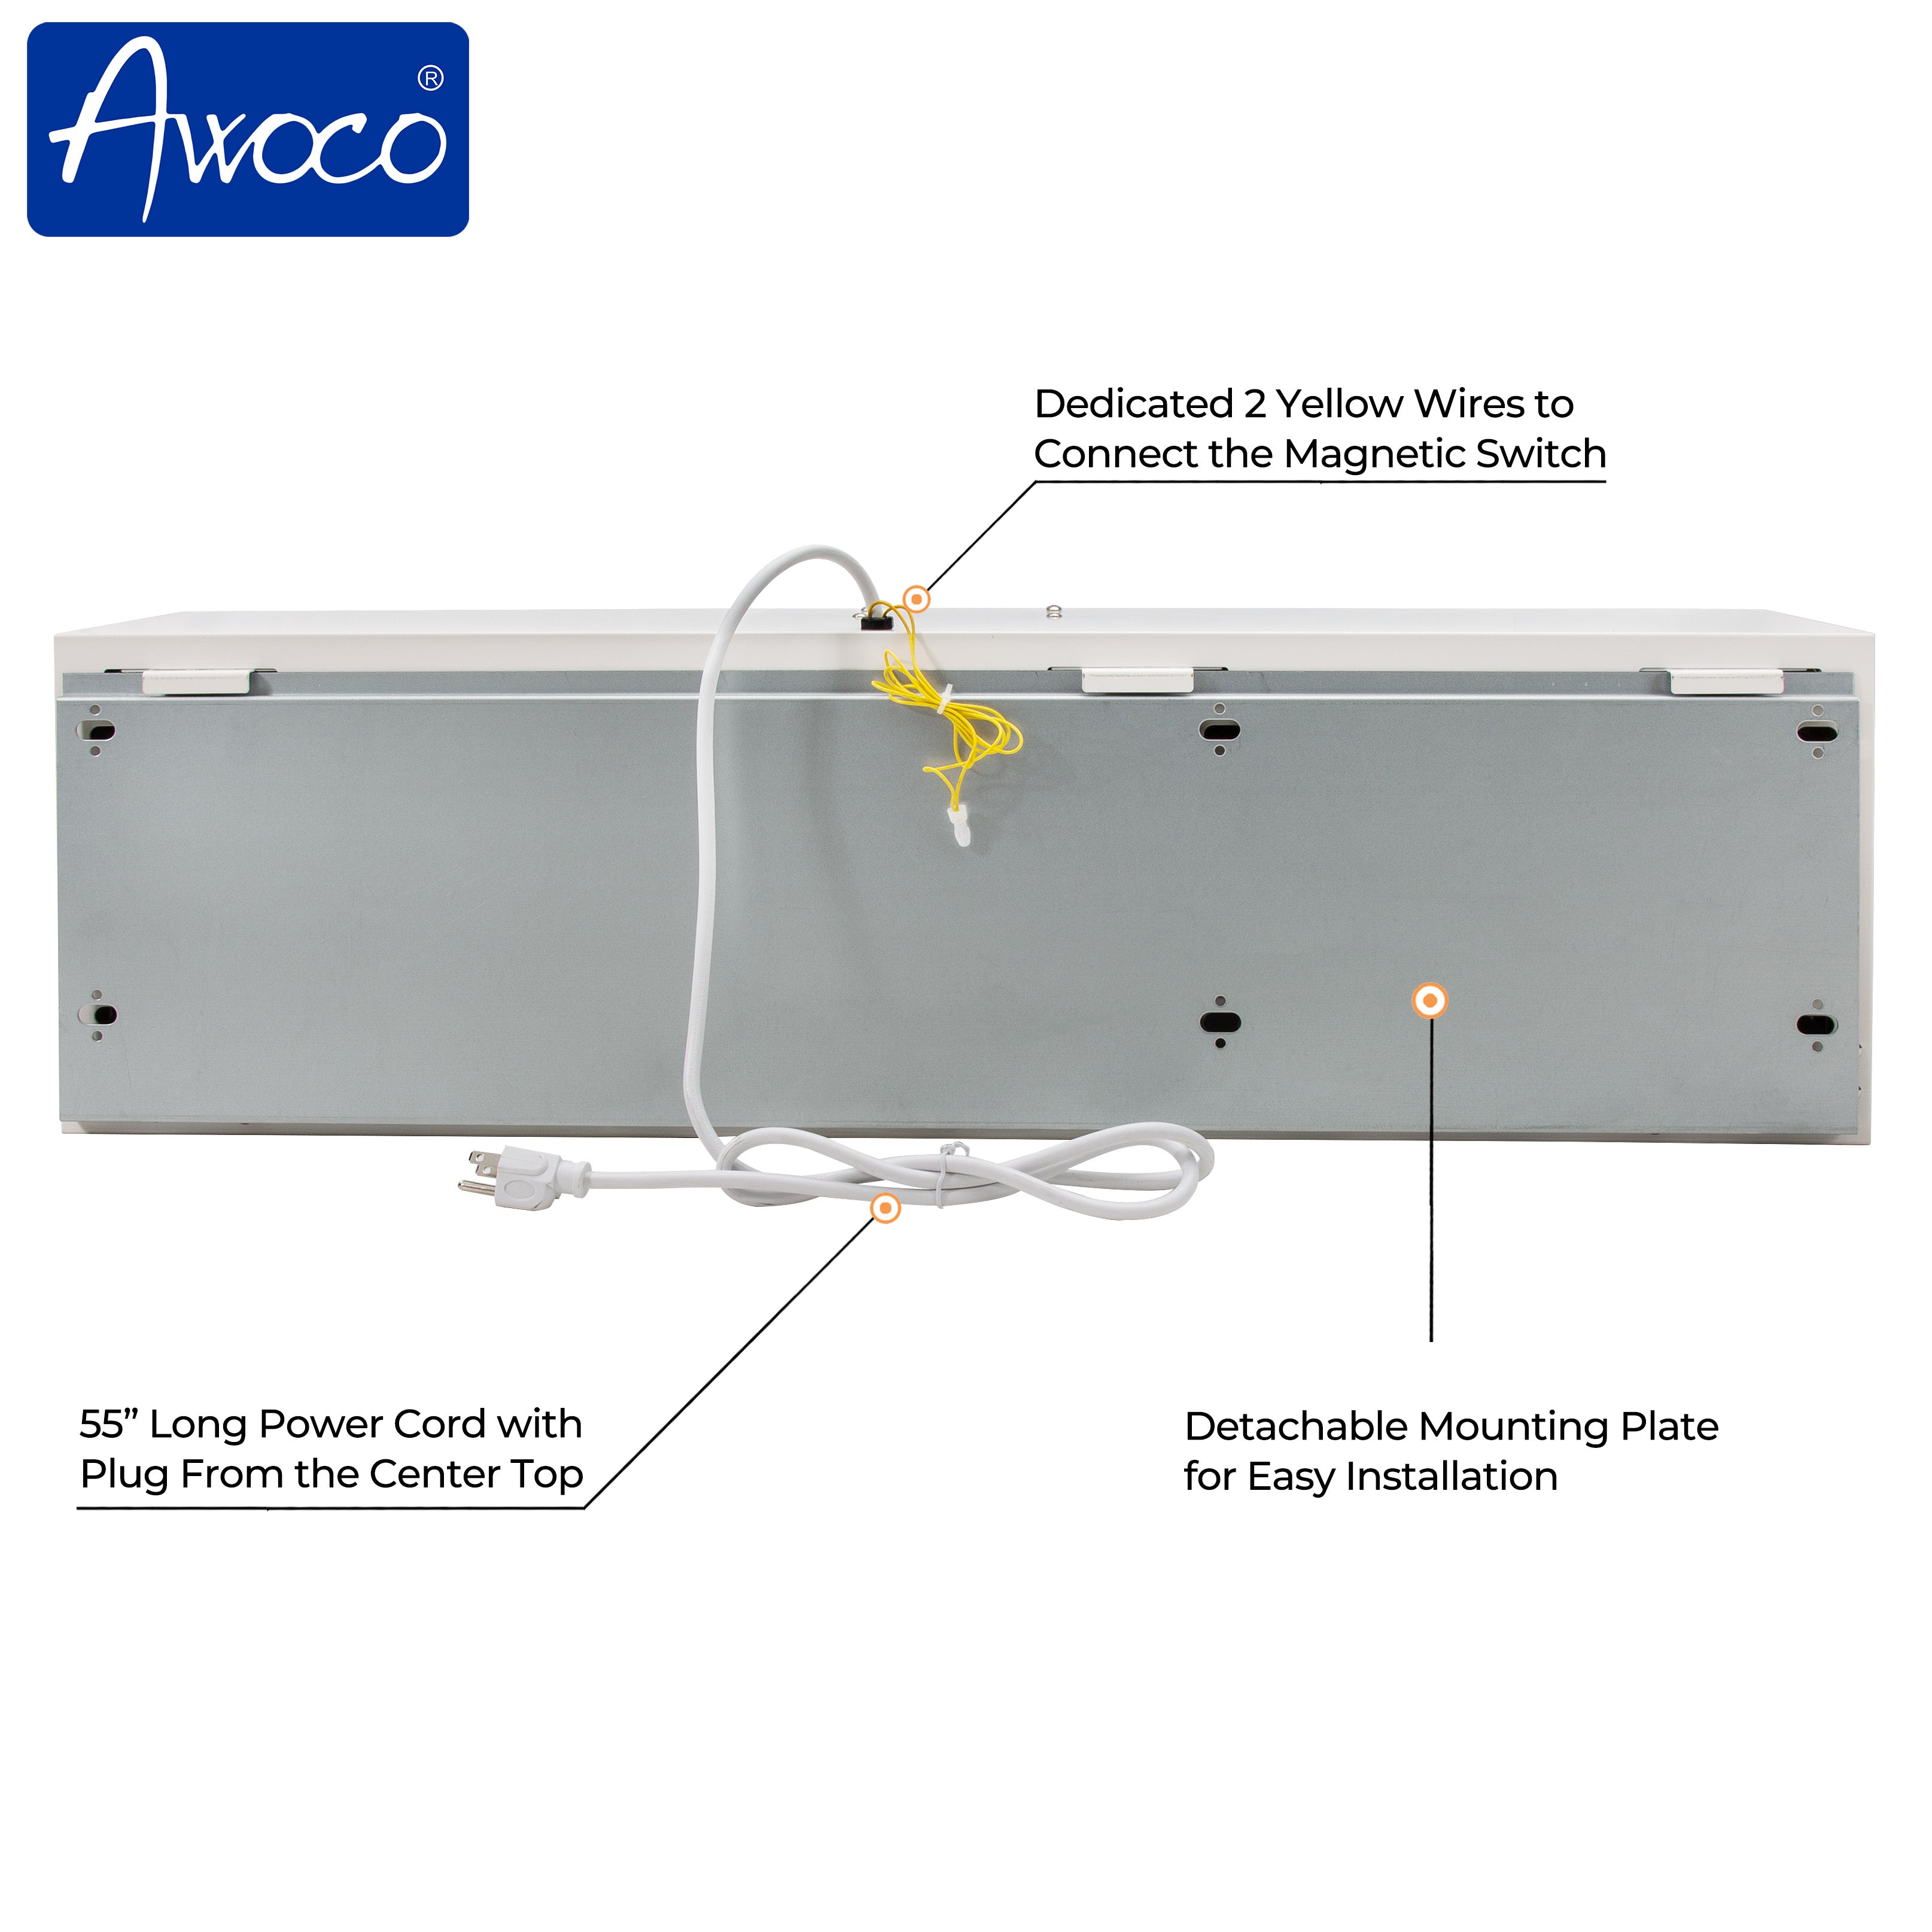 Awoco 36” Super Power 2 Speeds 1200 CFM DELAY ON Commercial Indoor Air Curtain, UL Certified, 120V Unheated with an Easy-Install Magnetic Switch